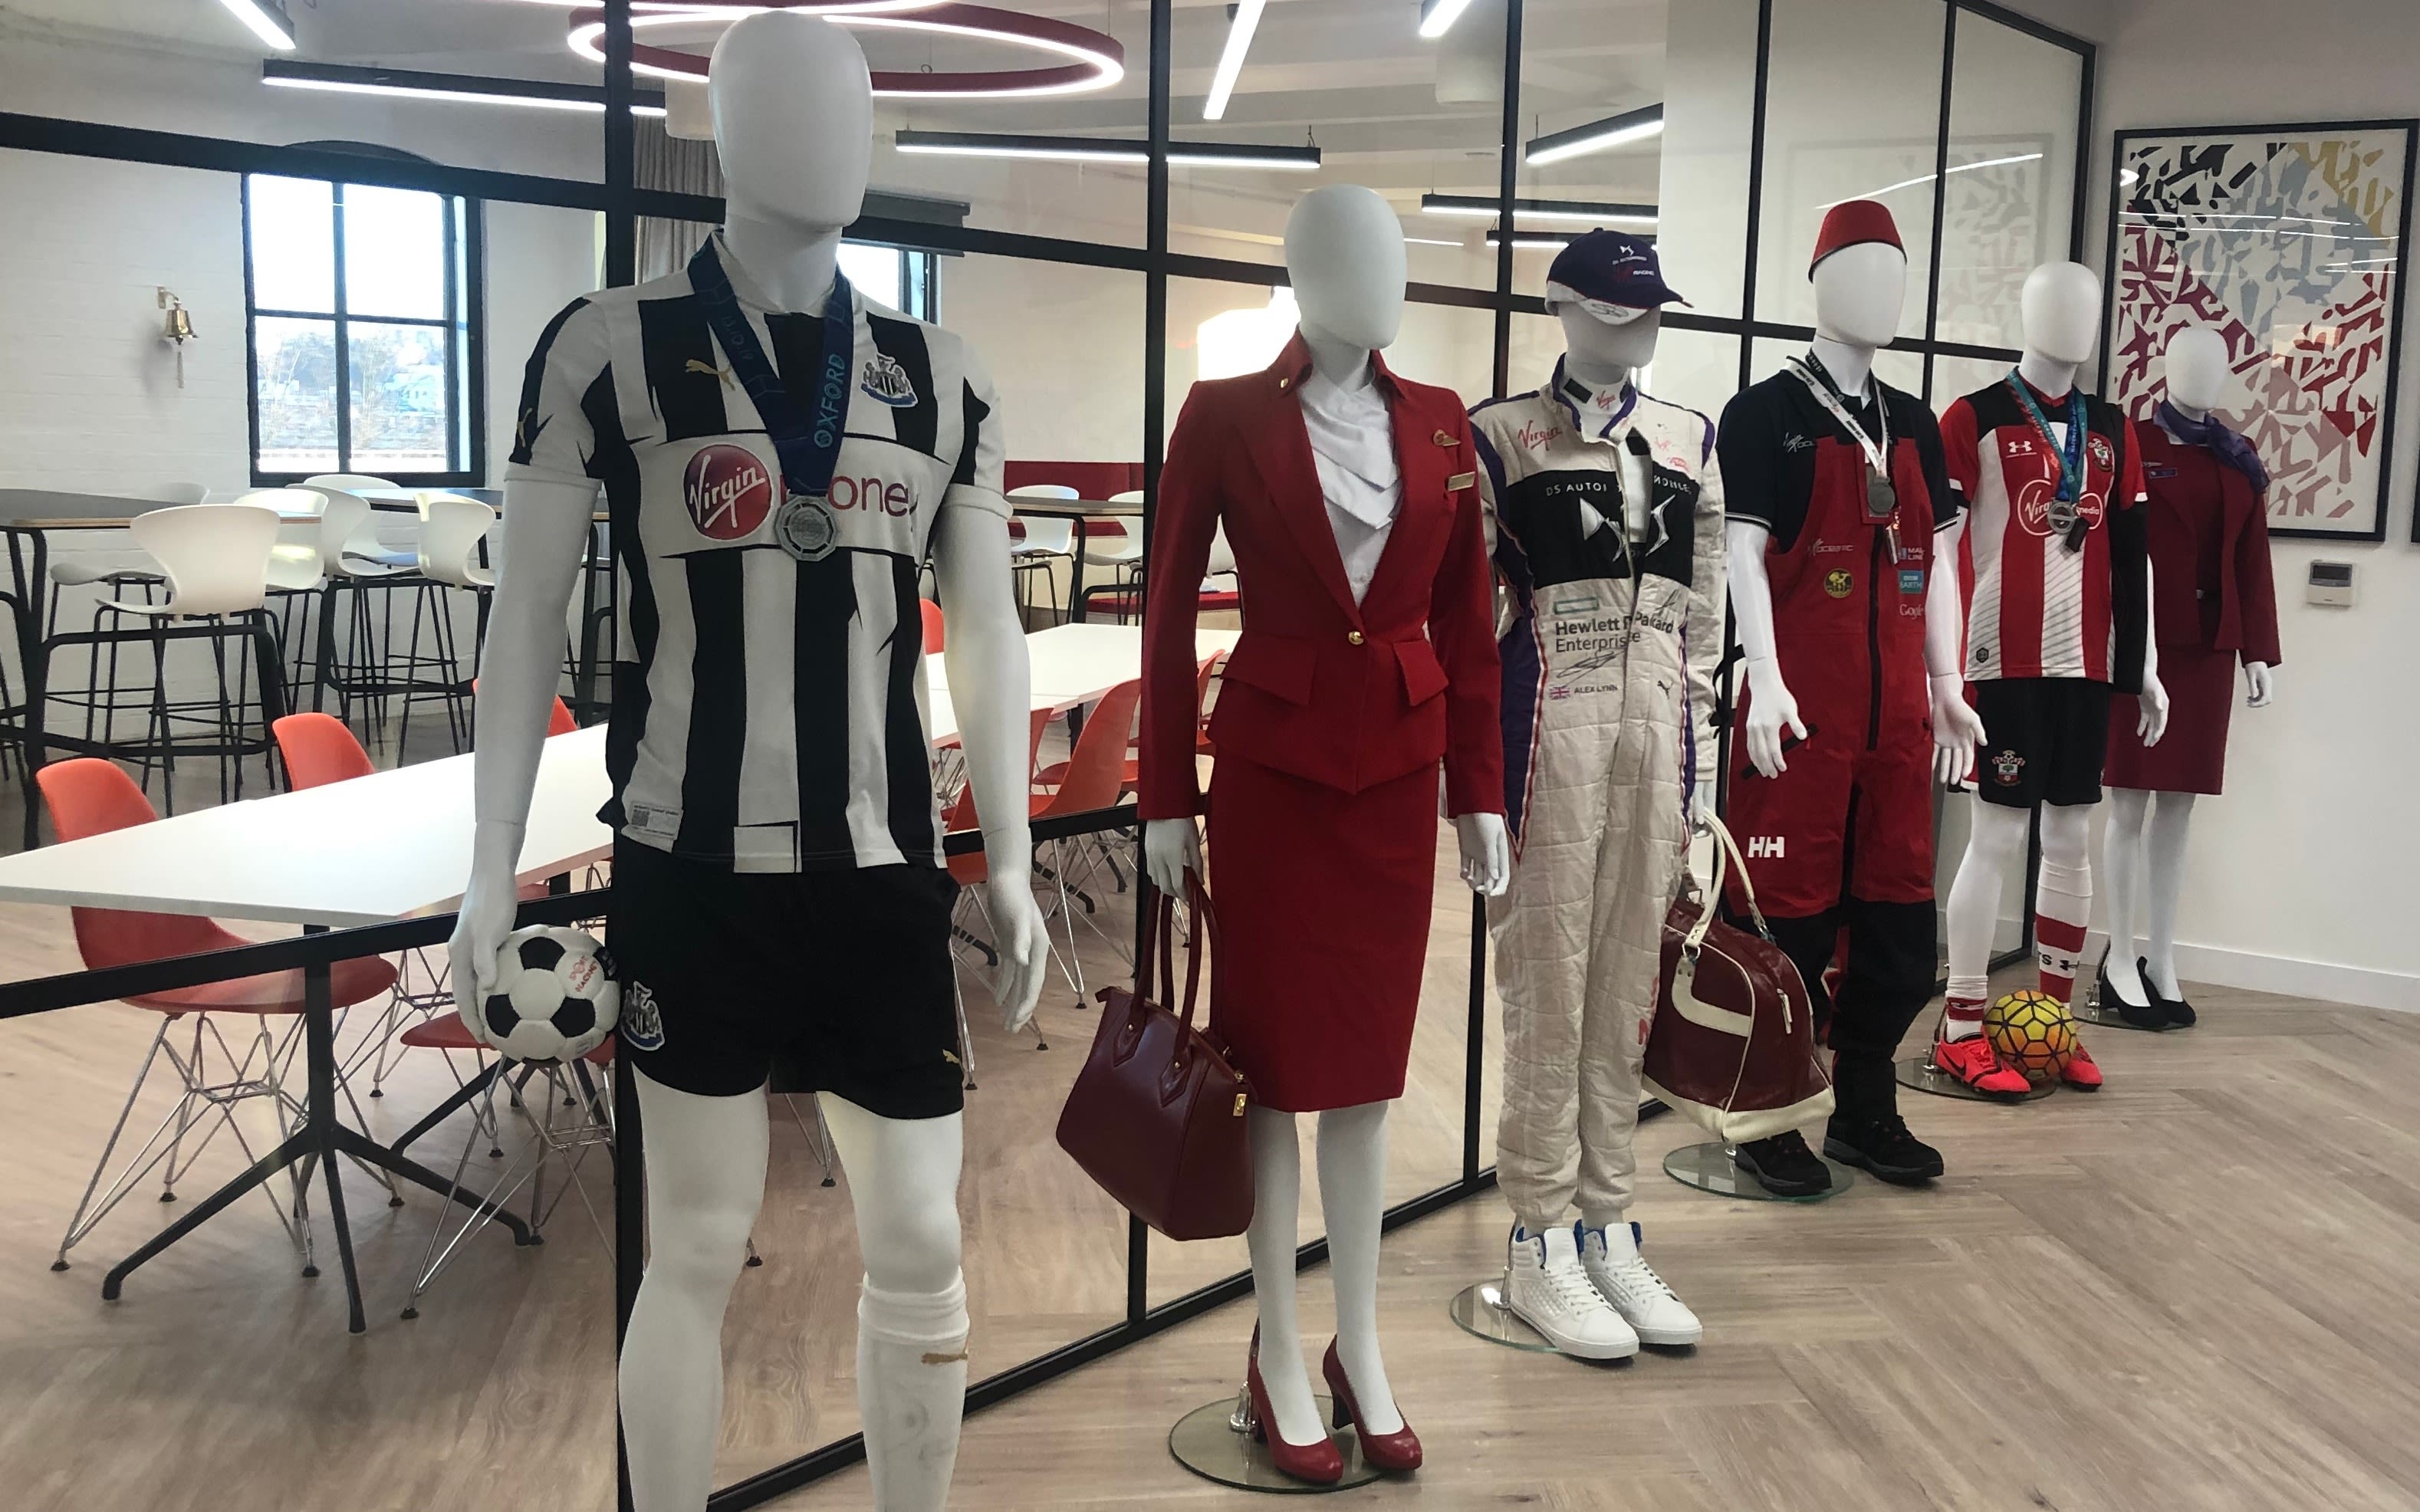 Mannequins wearing Virgin uniform and clothes with Virgin sponsor on